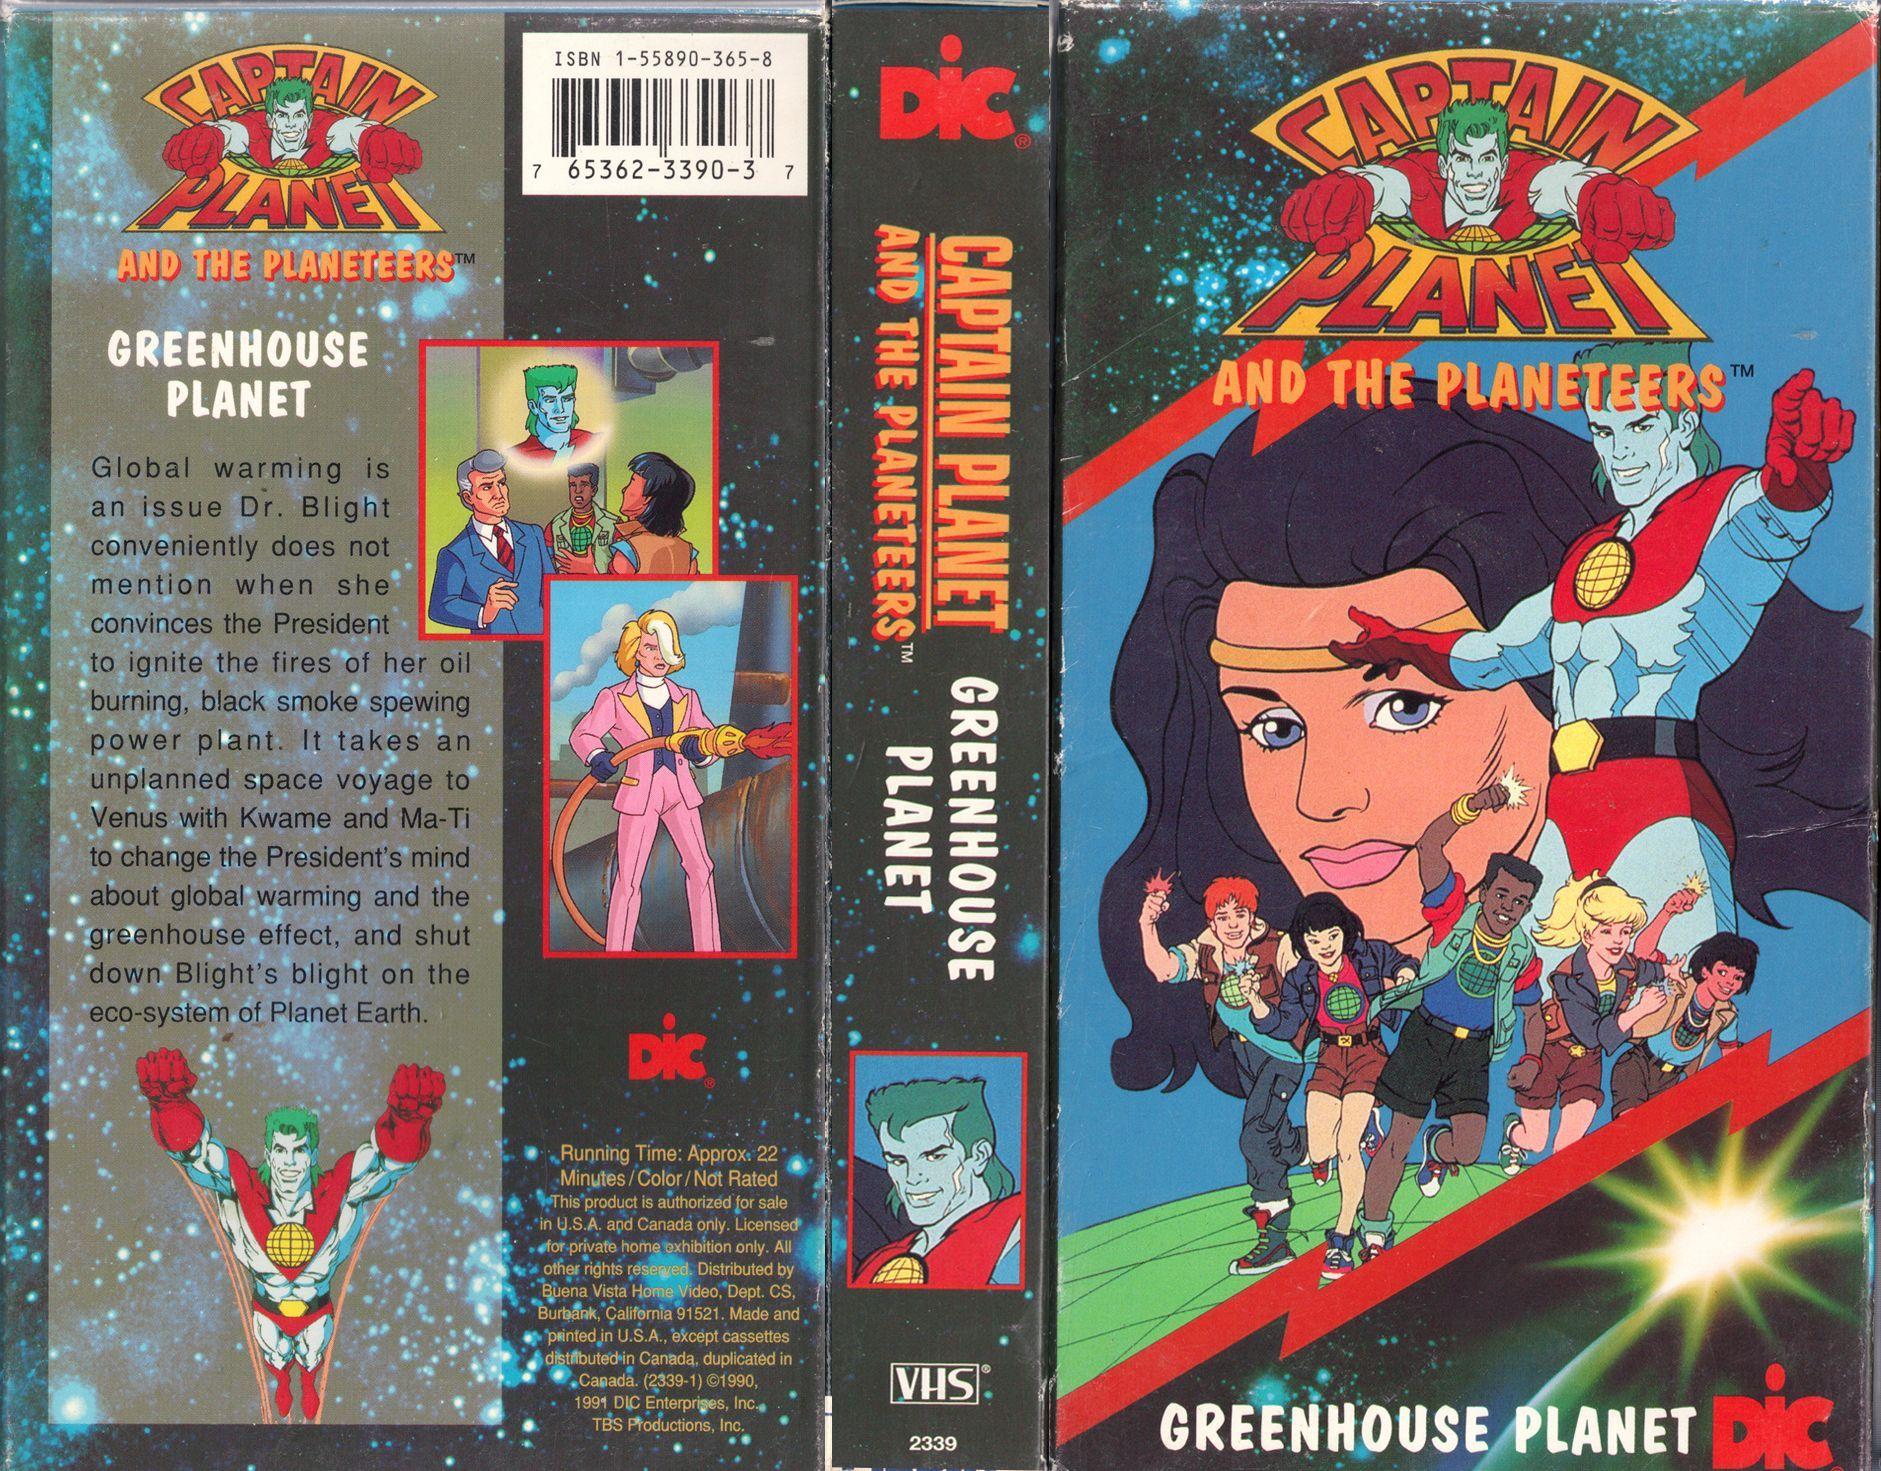 CAPTAIN PLANET AND THE PLANETEERS, GREENHOUSE PLANET MARCH 31 2011